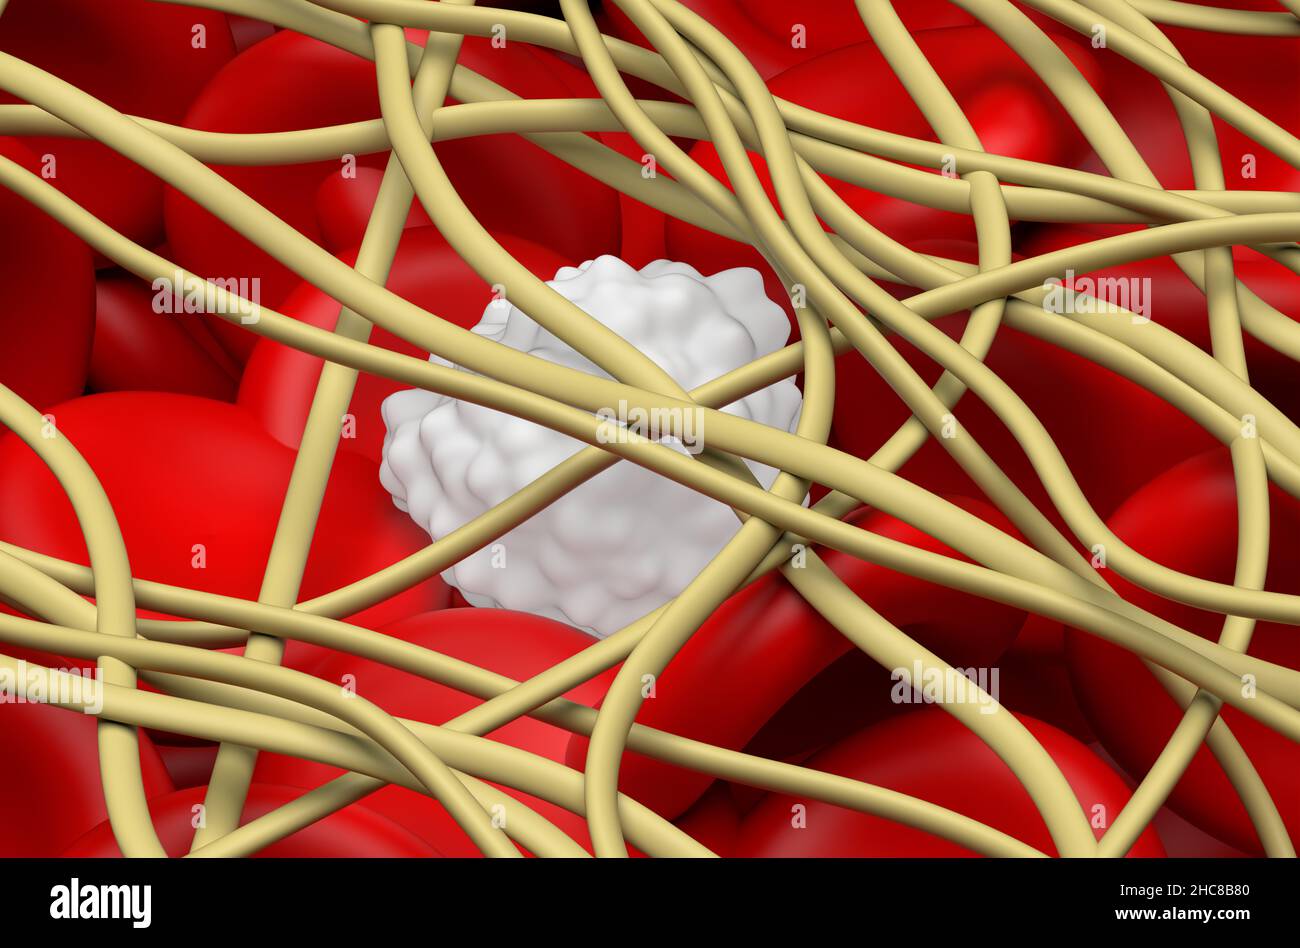 Blood clot. The red blood cells and a white blood cell are trapped in filaments of fibrin protein. closeup view 3d illustration Stock Photo